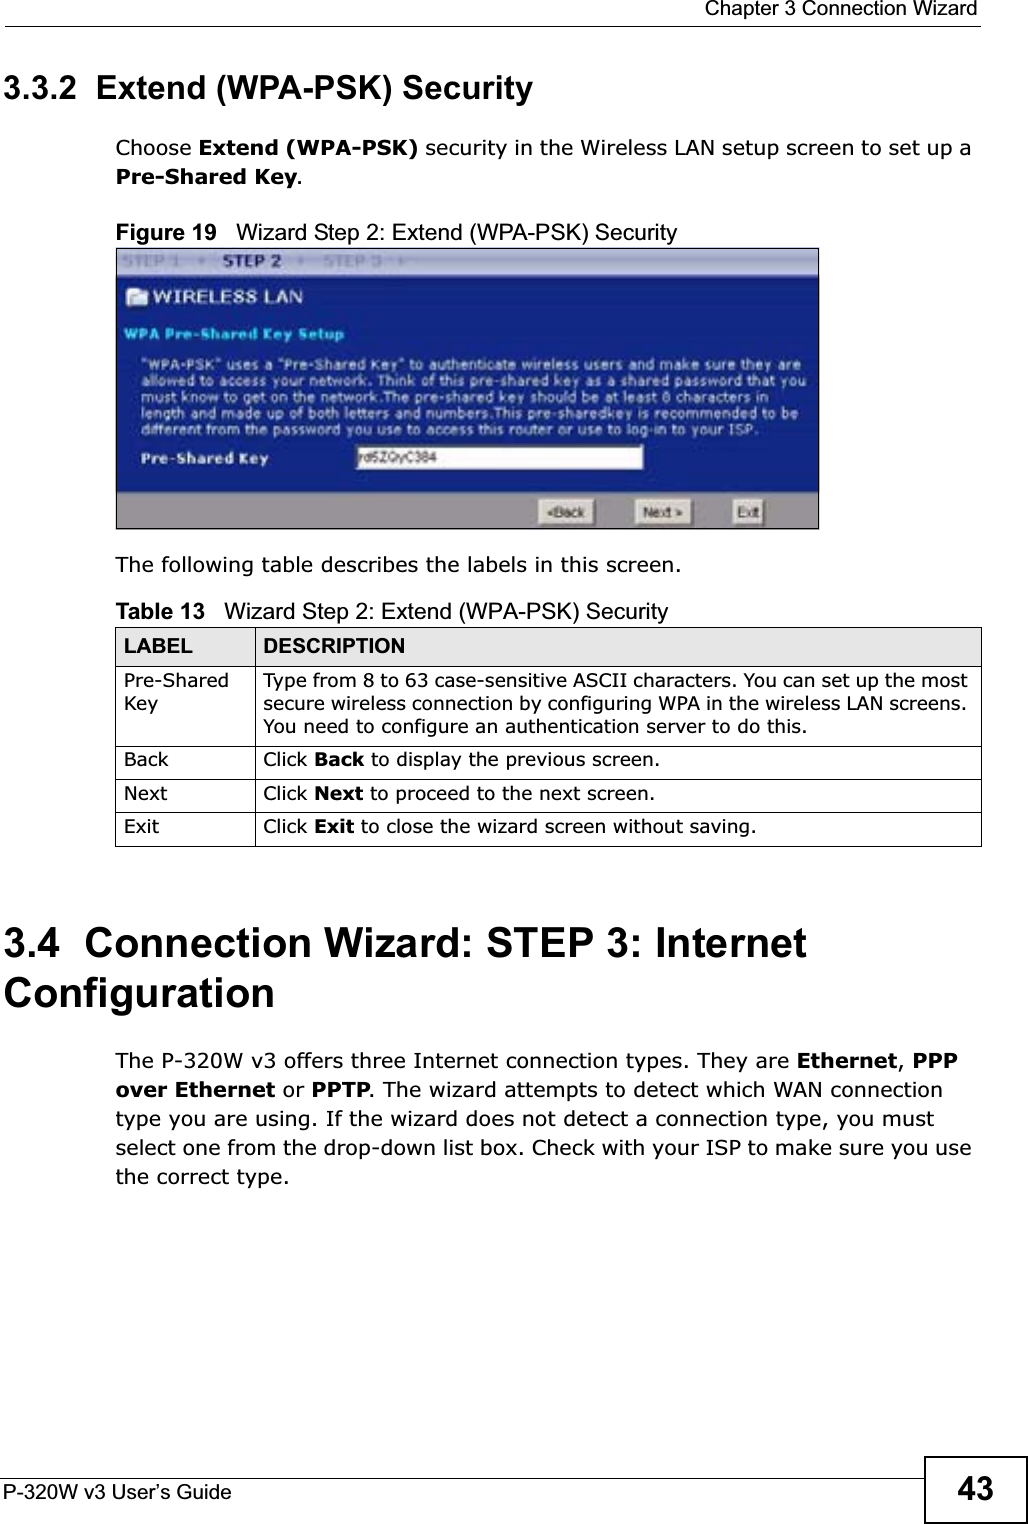  Chapter 3 Connection WizardP-320W v3 User’s Guide 433.3.2  Extend (WPA-PSK) SecurityChoose Extend (WPA-PSK) security in the Wireless LAN setup screen to set up a Pre-Shared Key.Figure 19   Wizard Step 2: Extend (WPA-PSK) SecurityThe following table describes the labels in this screen. 3.4  Connection Wizard: STEP 3: Internet ConfigurationThe P-320W v3 offers three Internet connection types. They are Ethernet,PPP over Ethernet or PPTP. The wizard attempts to detect which WAN connection type you are using. If the wizard does not detect a connection type, you must select one from the drop-down list box. Check with your ISP to make sure you use the correct type.Table 13   Wizard Step 2: Extend (WPA-PSK) SecurityLABEL DESCRIPTIONPre-SharedKeyType from 8 to 63 case-sensitive ASCII characters. You can set up the most secure wireless connection by configuring WPA in the wireless LAN screens. You need to configure an authentication server to do this.Back Click Back to display the previous screen.Next Click Next to proceed to the next screen. Exit Click Exit to close the wizard screen without saving.